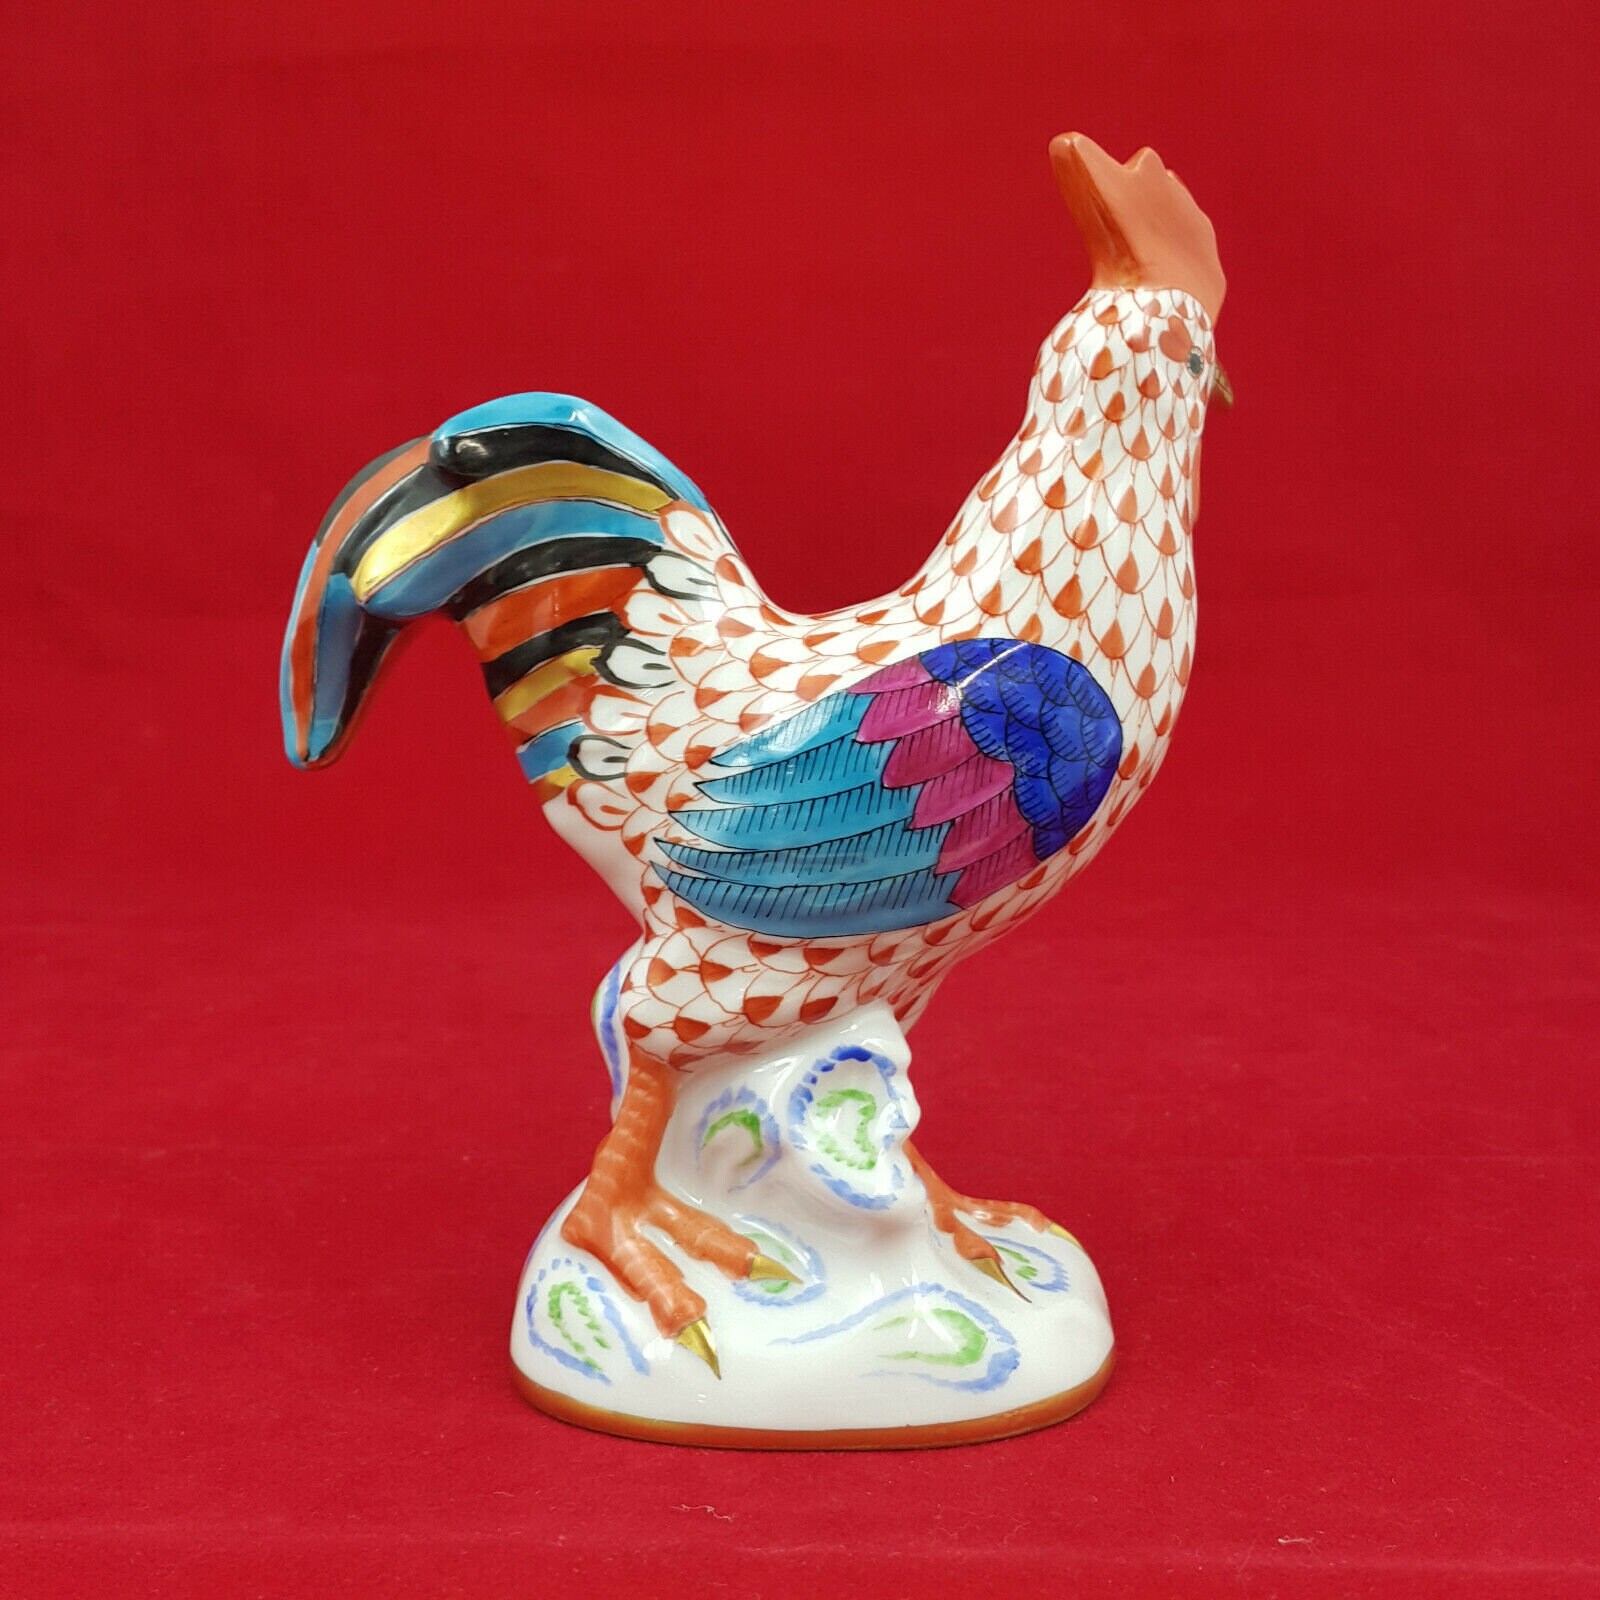 Herend Porcelain Rooster Figurine With Fishnet Pattern | Etsy